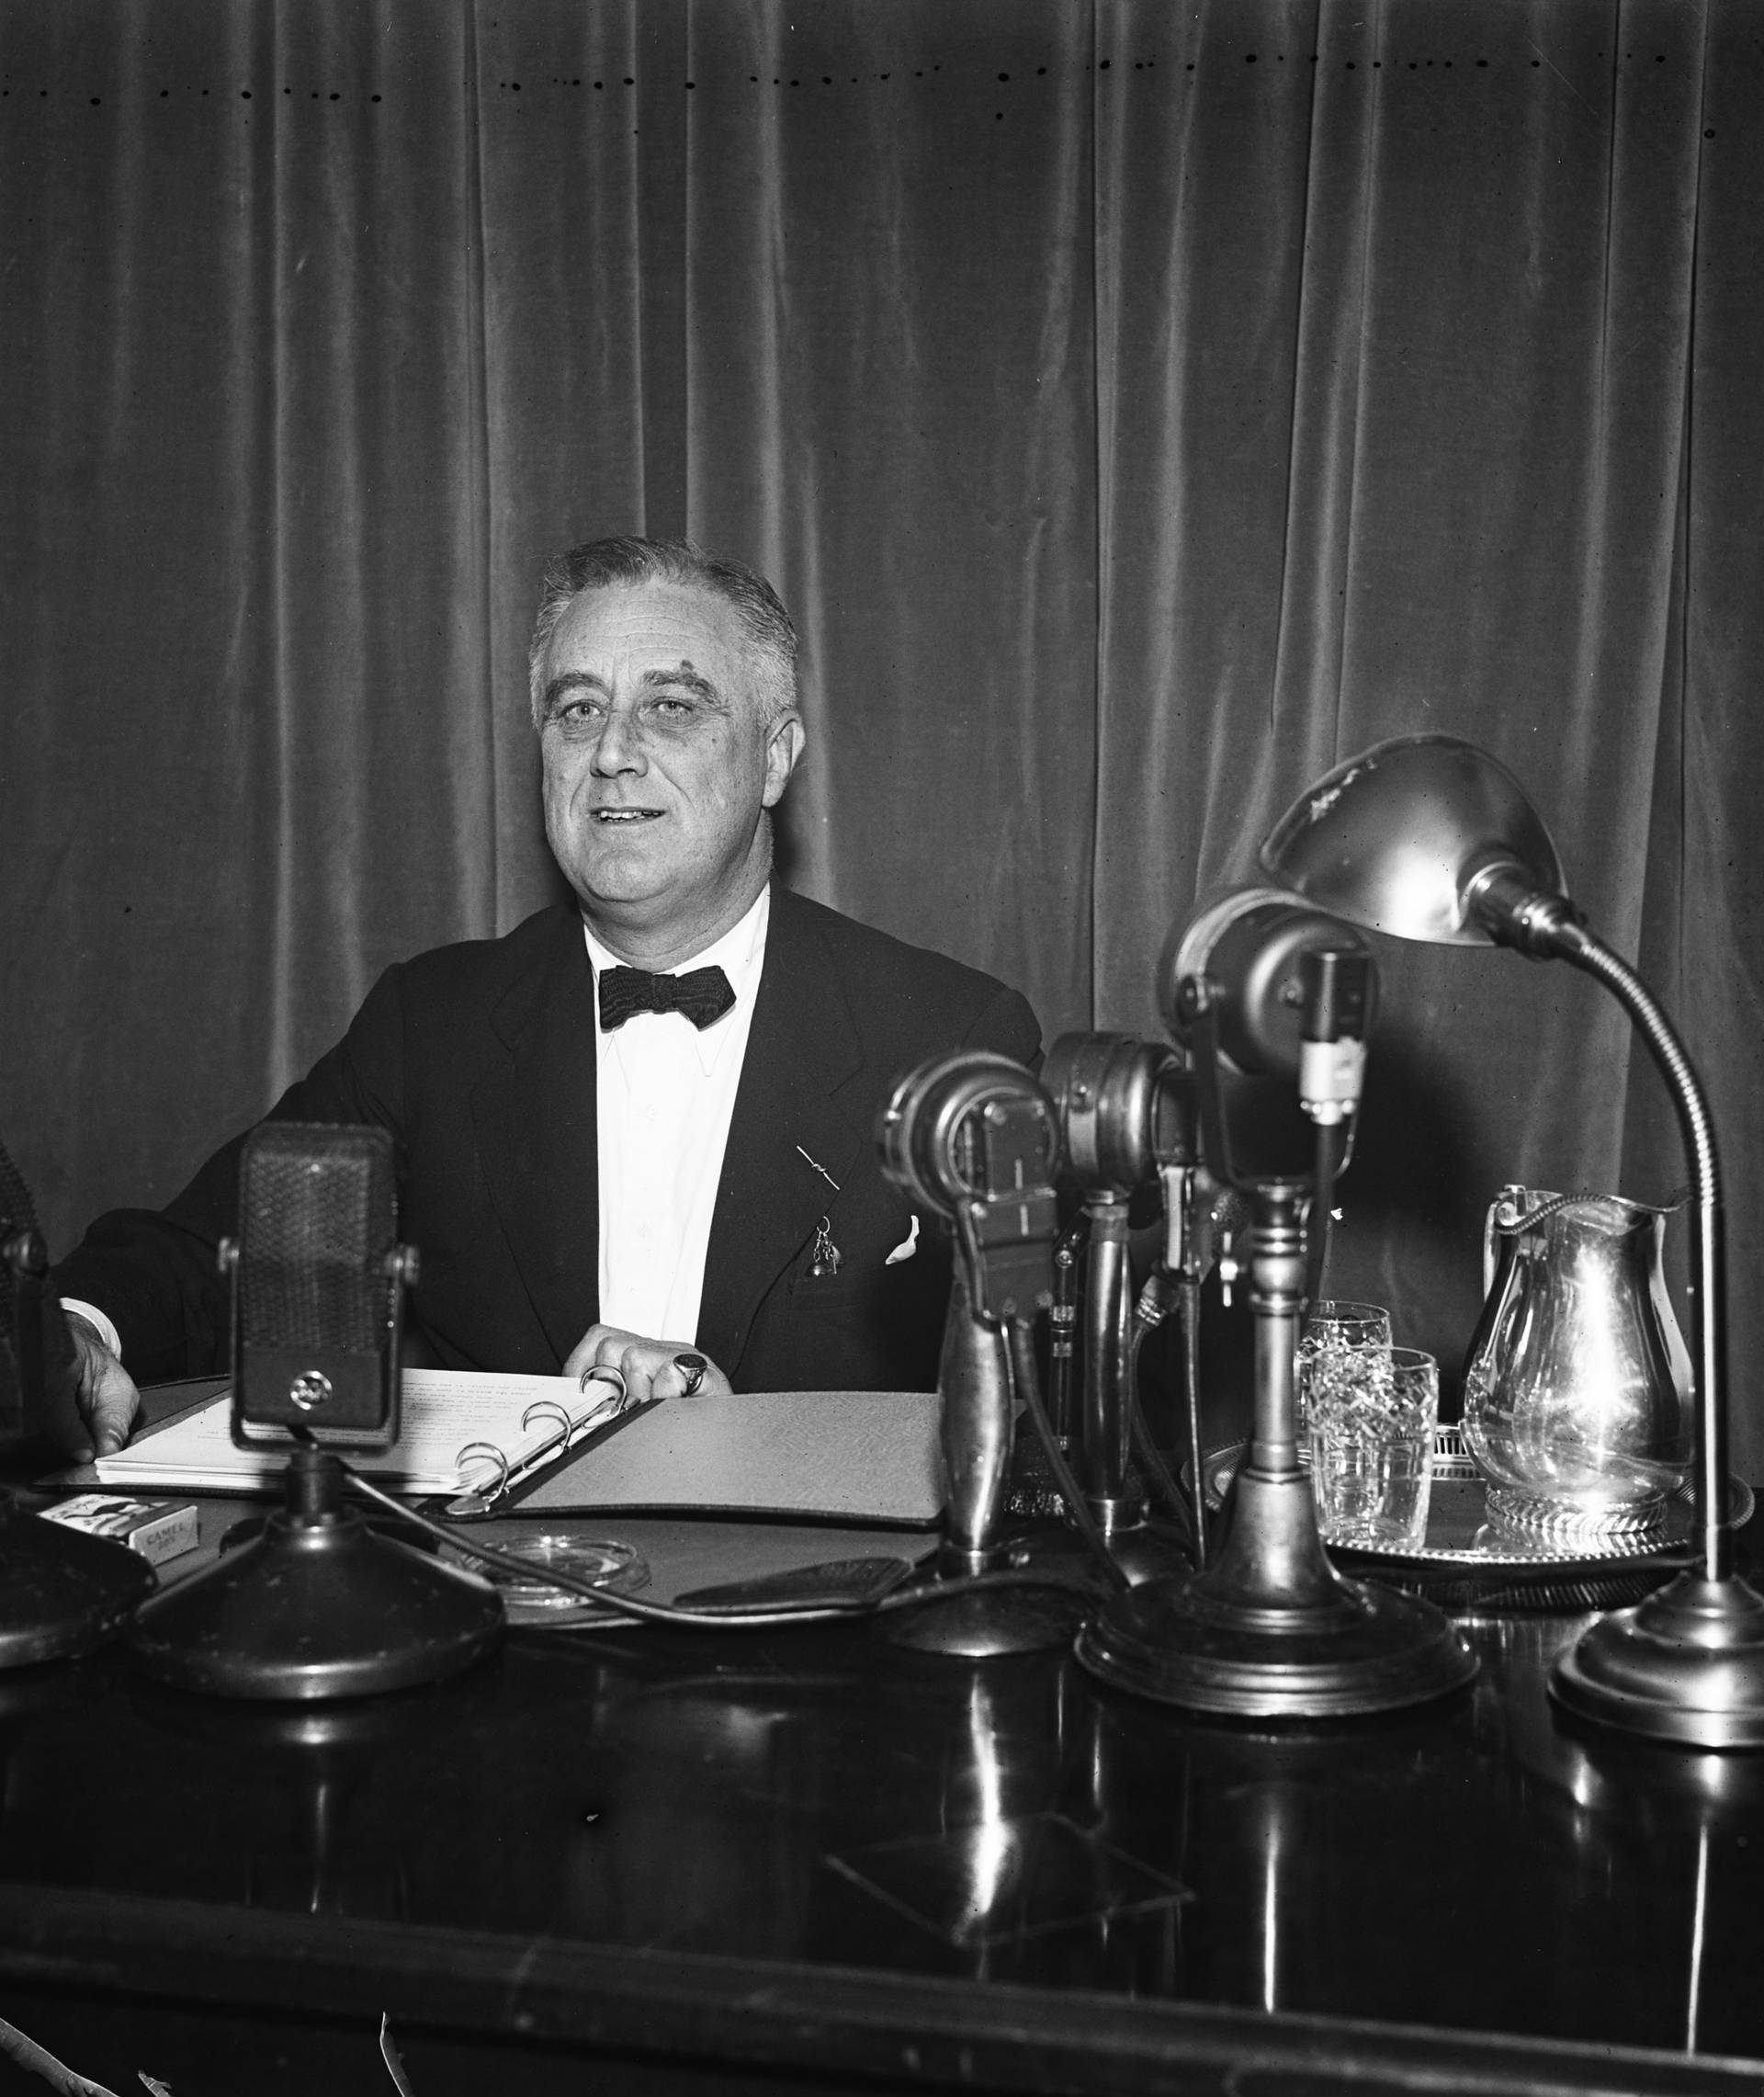 Franklin D. Roosevelt photographed during his 1937 fireside chat, an effort to mobilize public support for his court-packing scheme